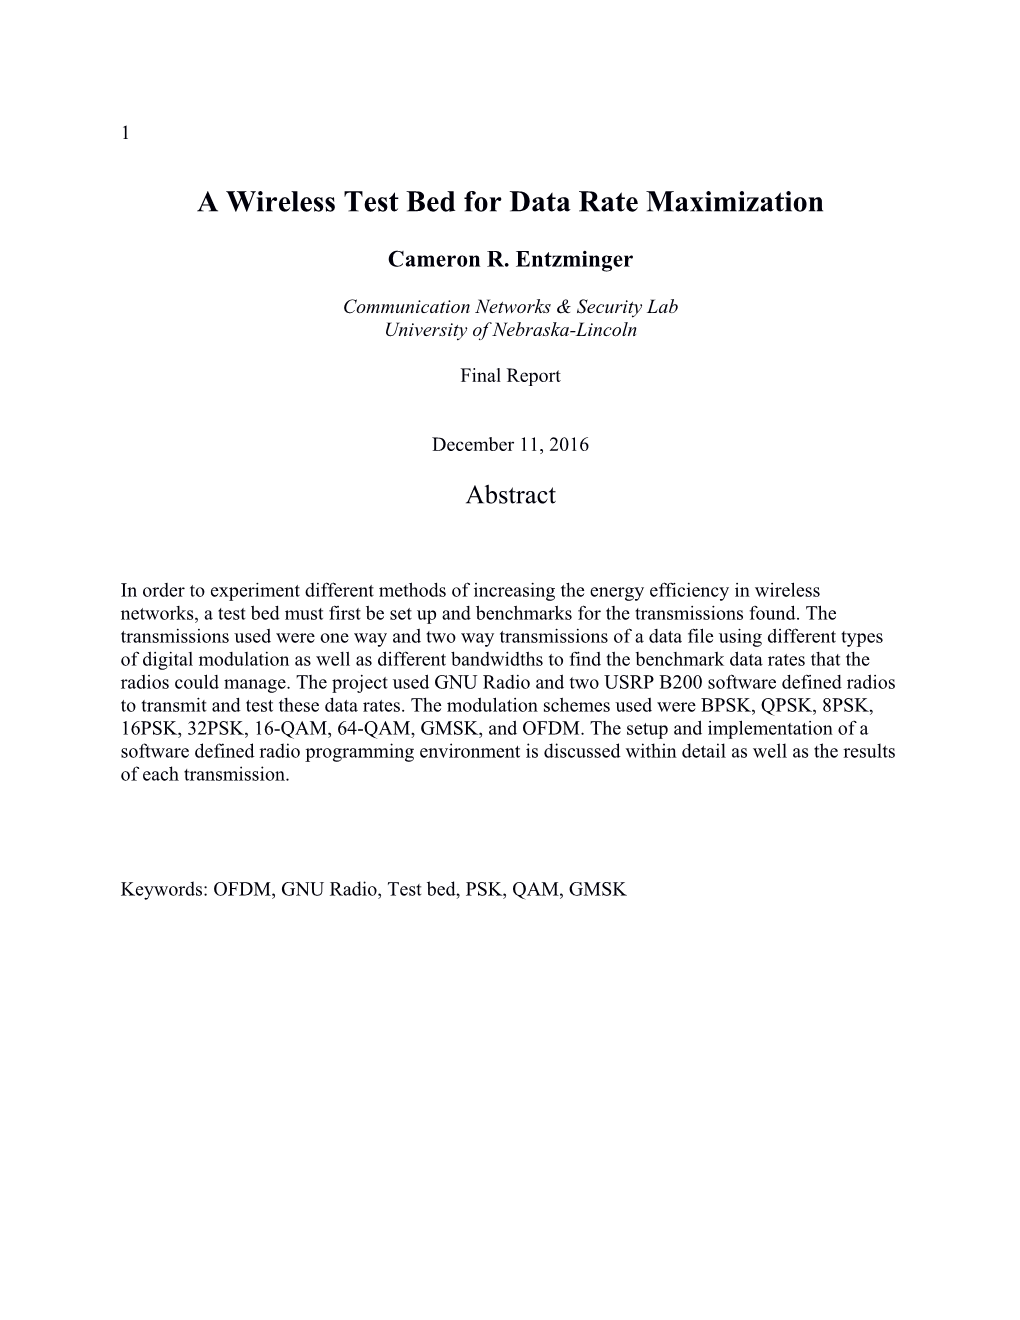 A Wireless Test Bed for Data Rate Maximization